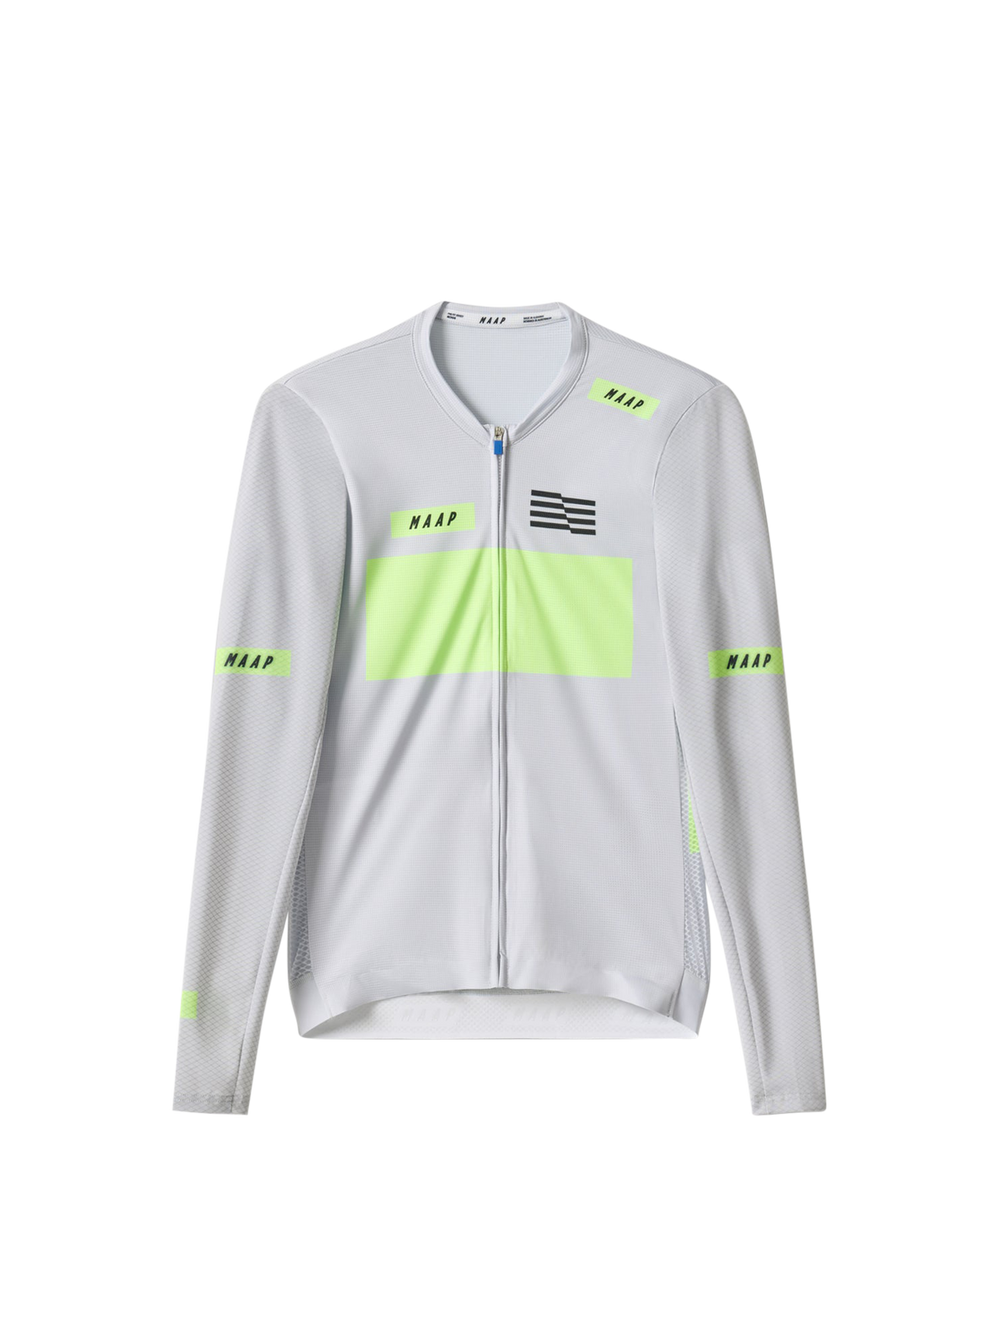 Product Image for System Pro Air LS Jersey